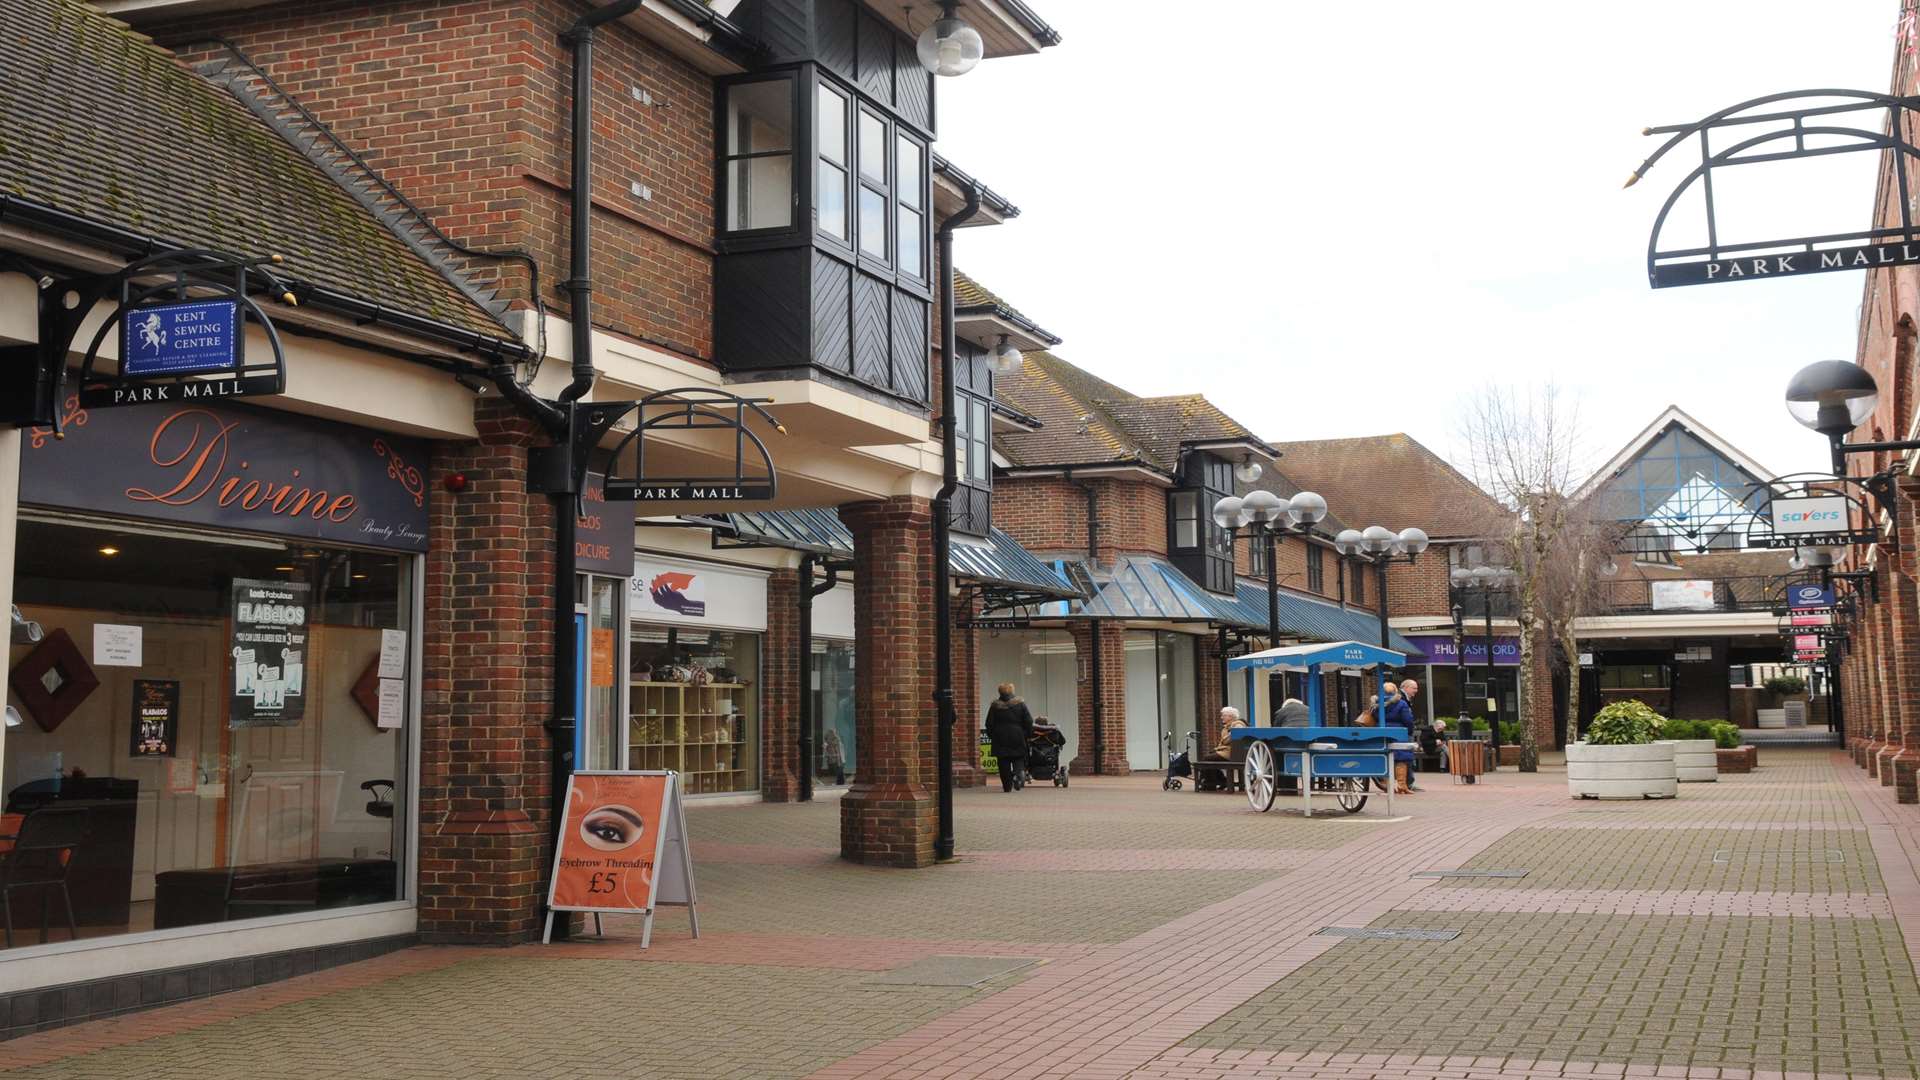 The plans for the shopping centre have been revealed this week